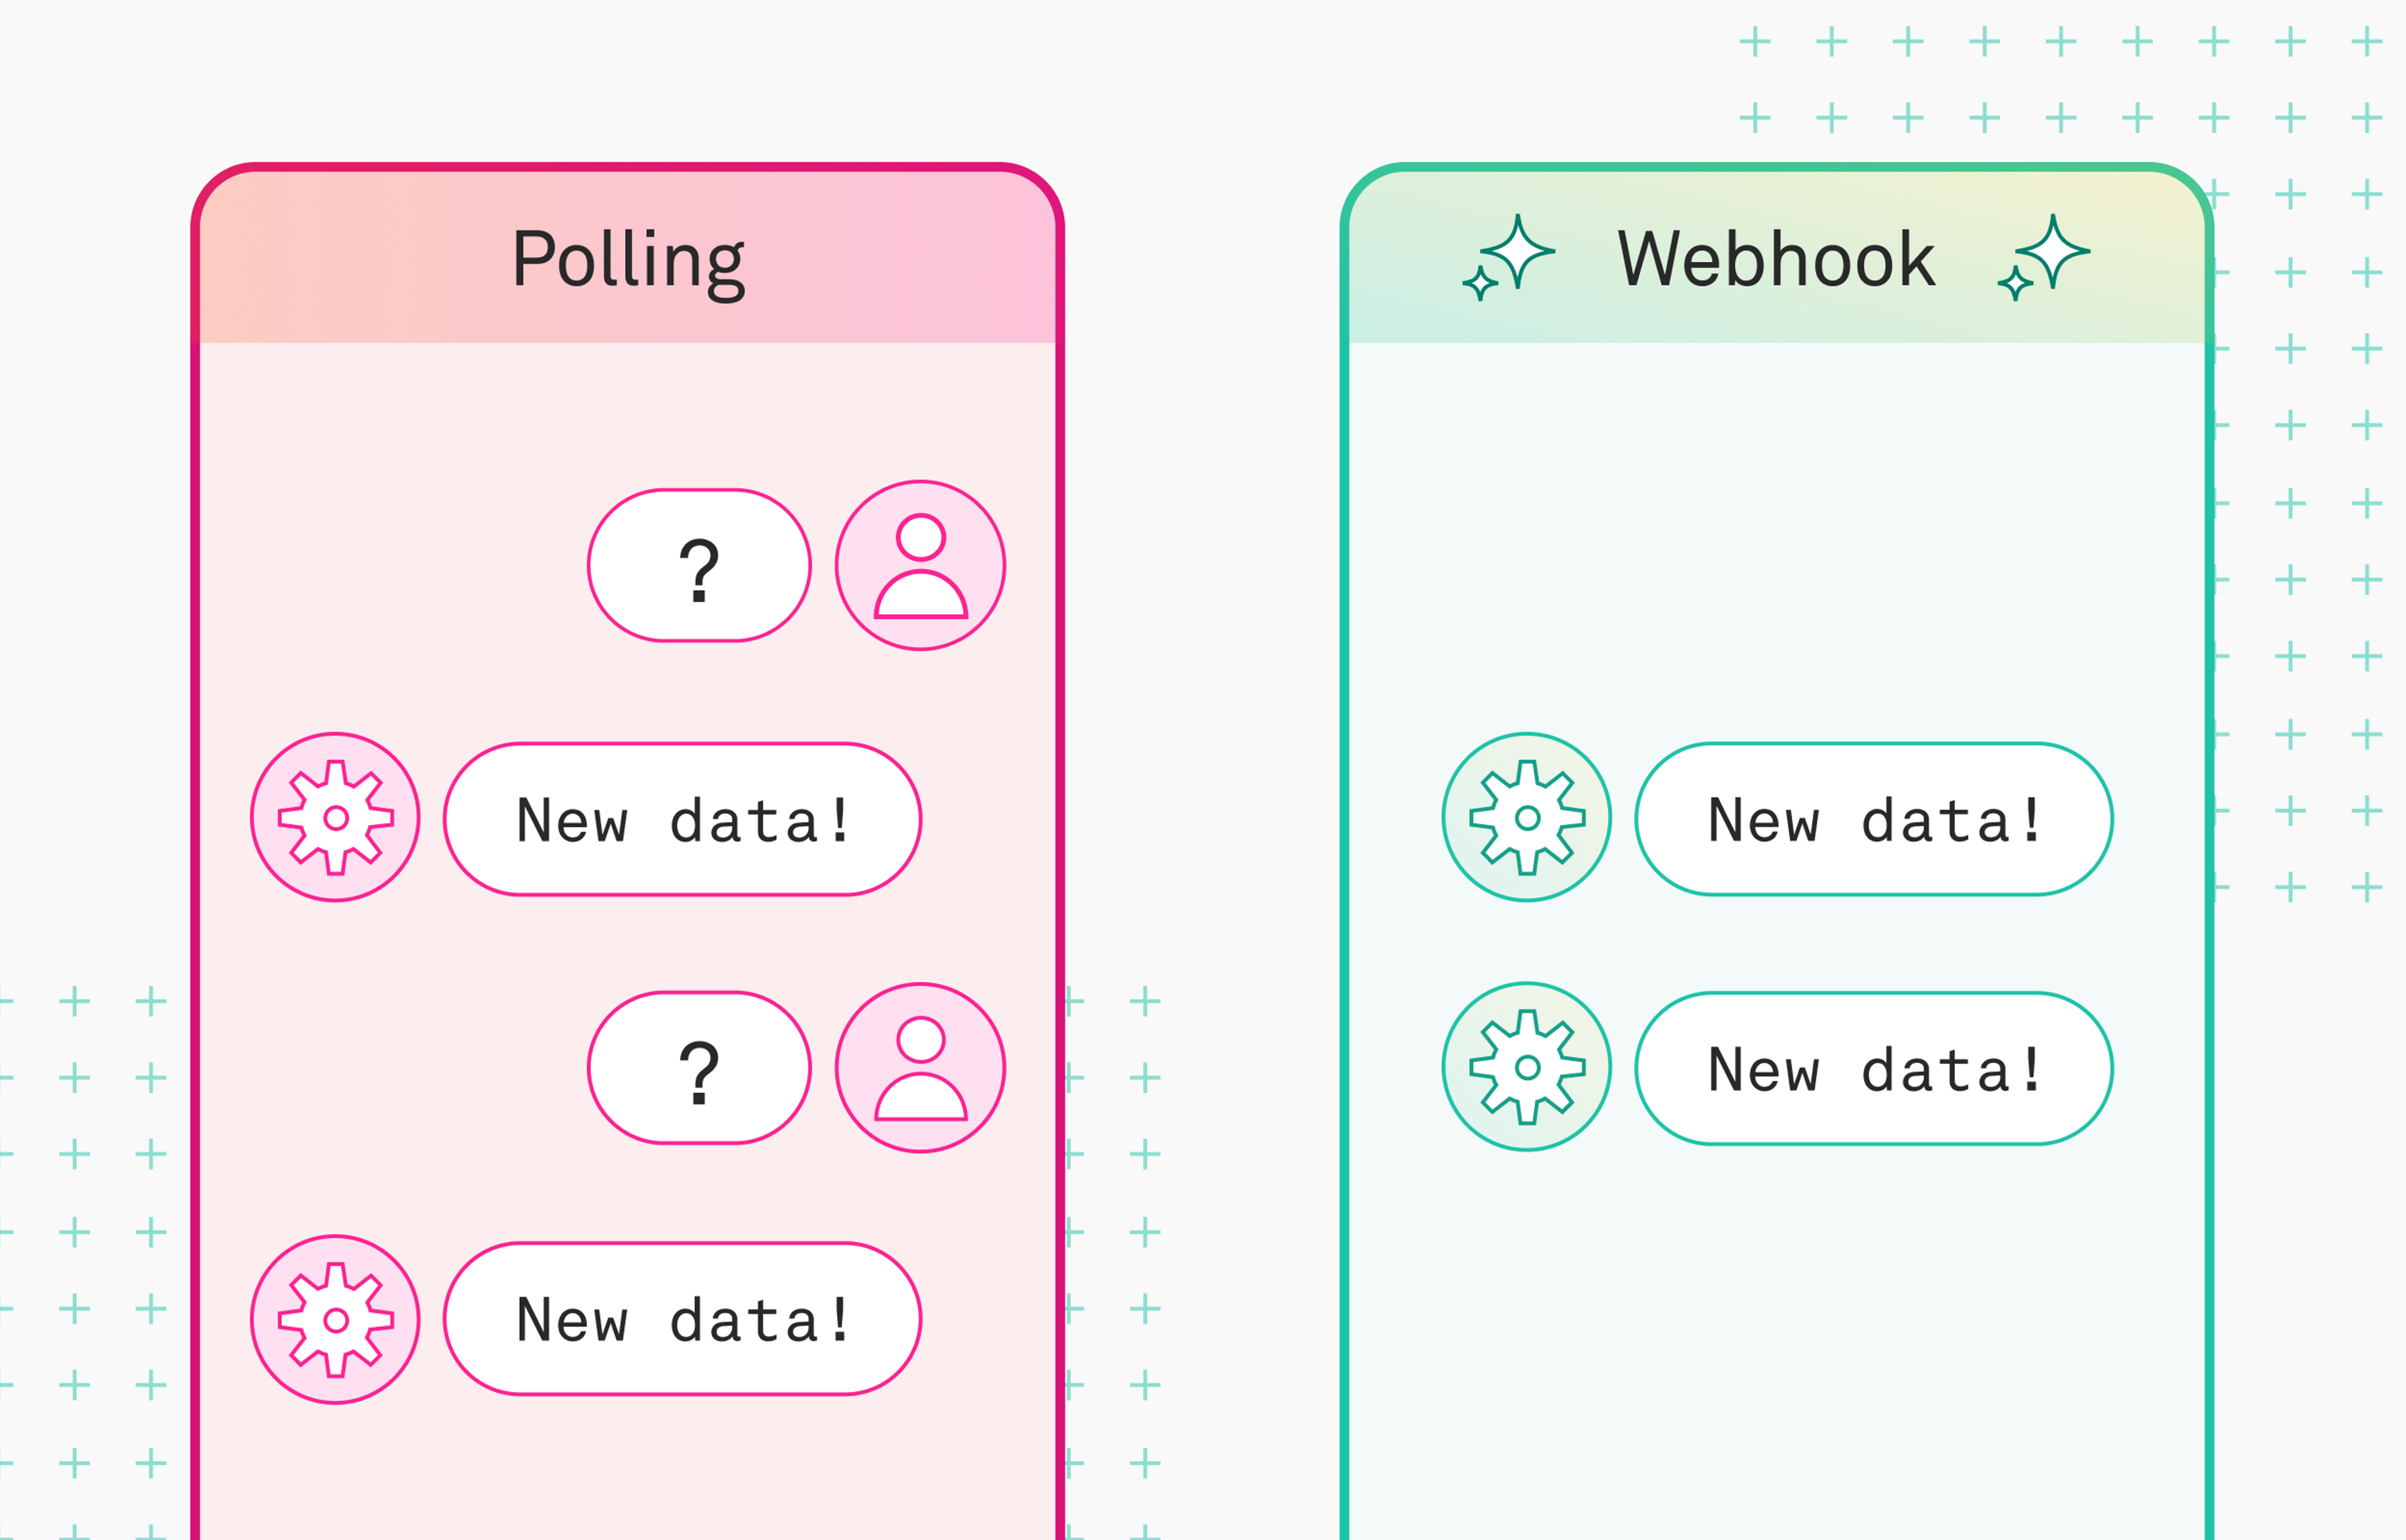 Two phone illustrations side-by-side. The left one is pink and represents polling. The right one is green and represents webhooks. On the left under polling, the user has to ask for data each time. This is represented by the user chatting to someone and then getting a response back with data. On the right under webhooks, the user never has to ask for data and just gets it. This is represented by the user never appearing in the chat.